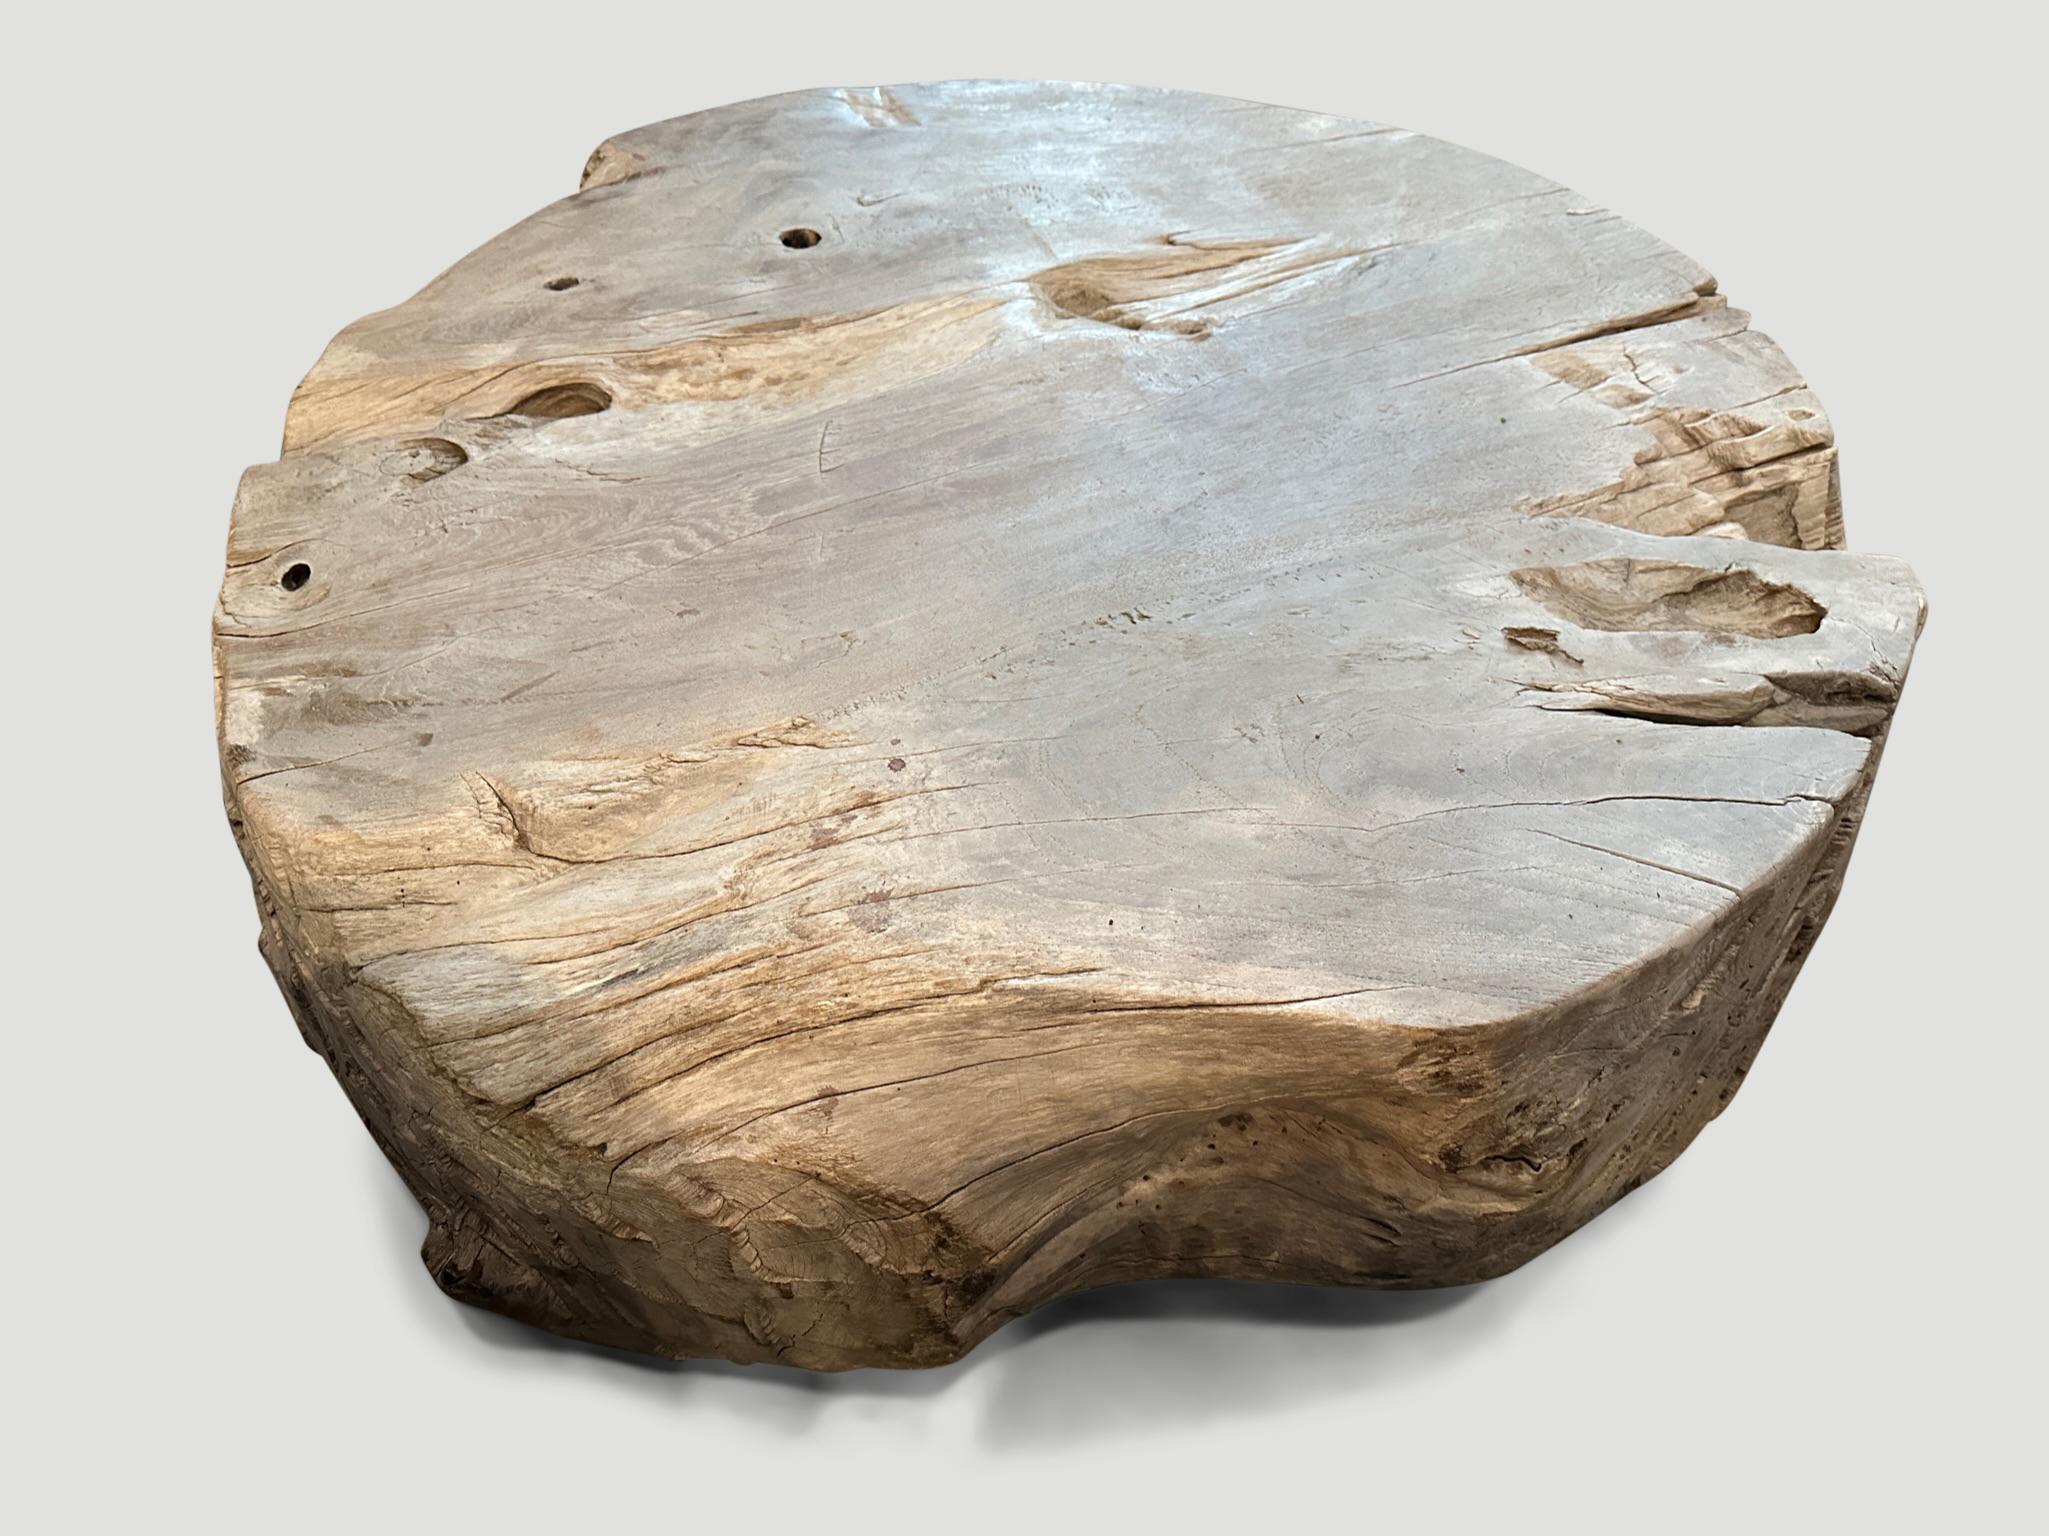 Beautiful patina on this aged teak wood round coffee table. Hand carved whilst respecting the natural organic wood.

This coffee table was hand made in the spirit of Wabi-Sabi, a Japanese philosophy that beauty can be found in imperfection and